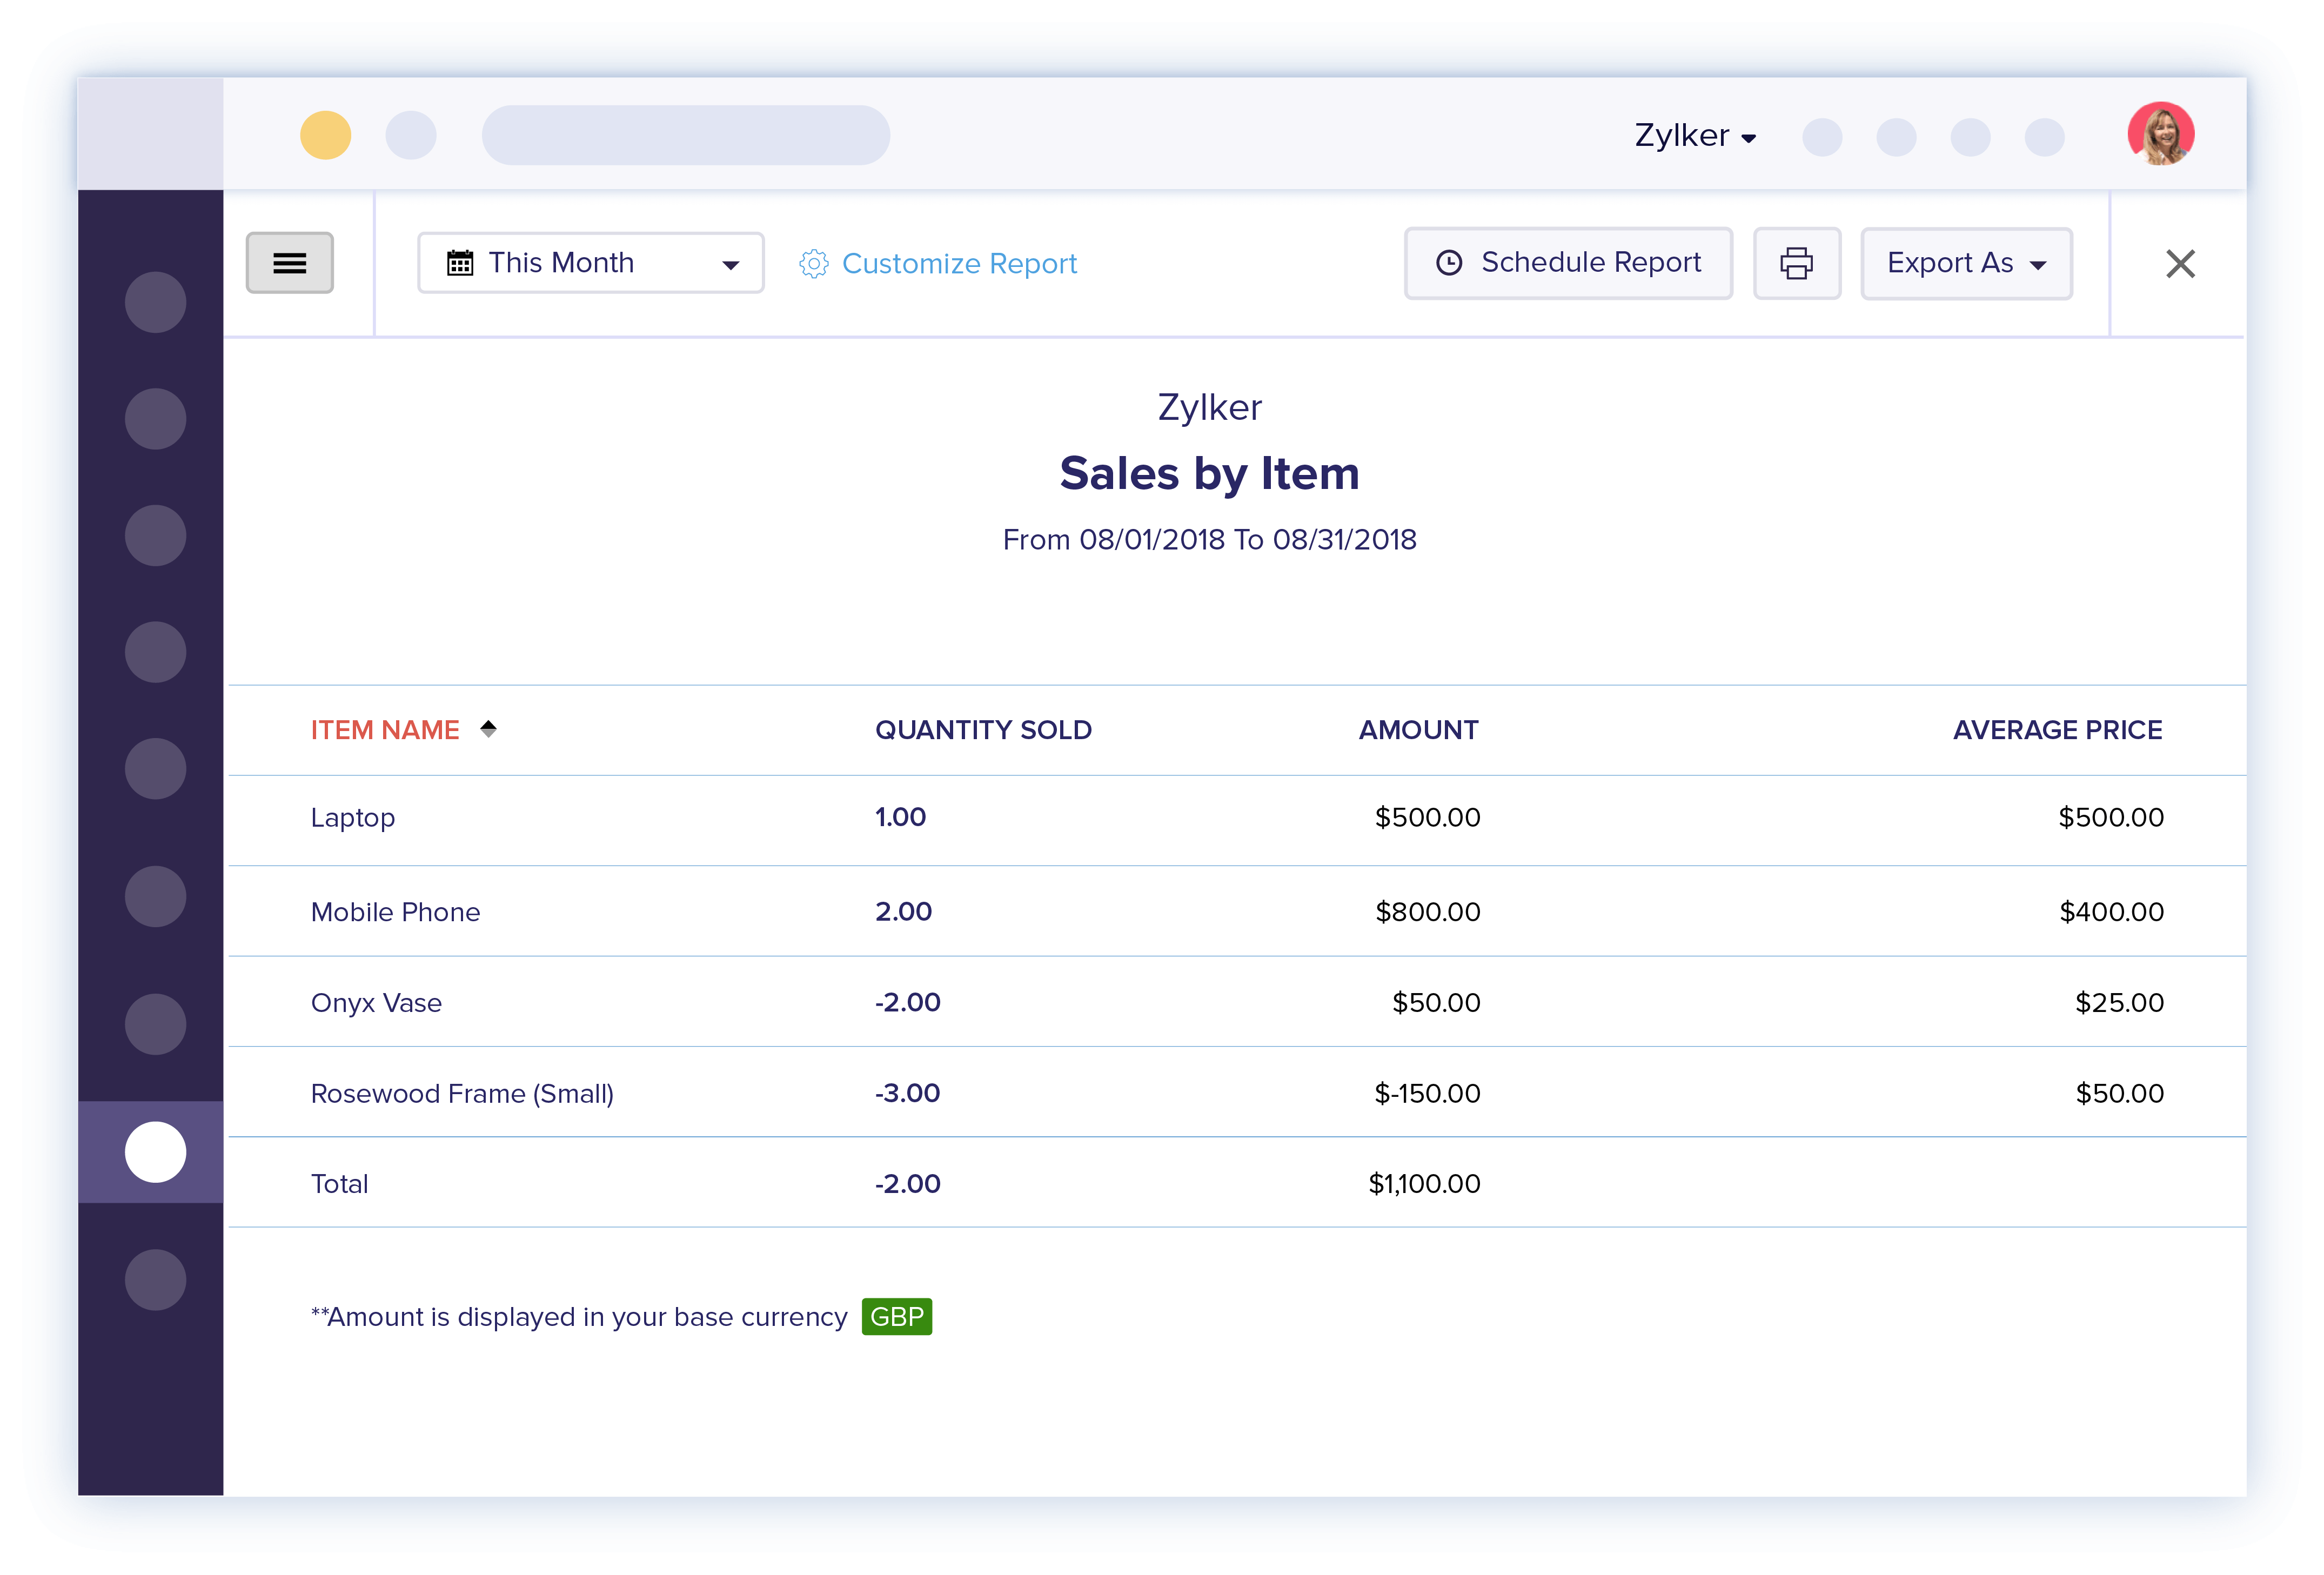 invoice professional invoicing software